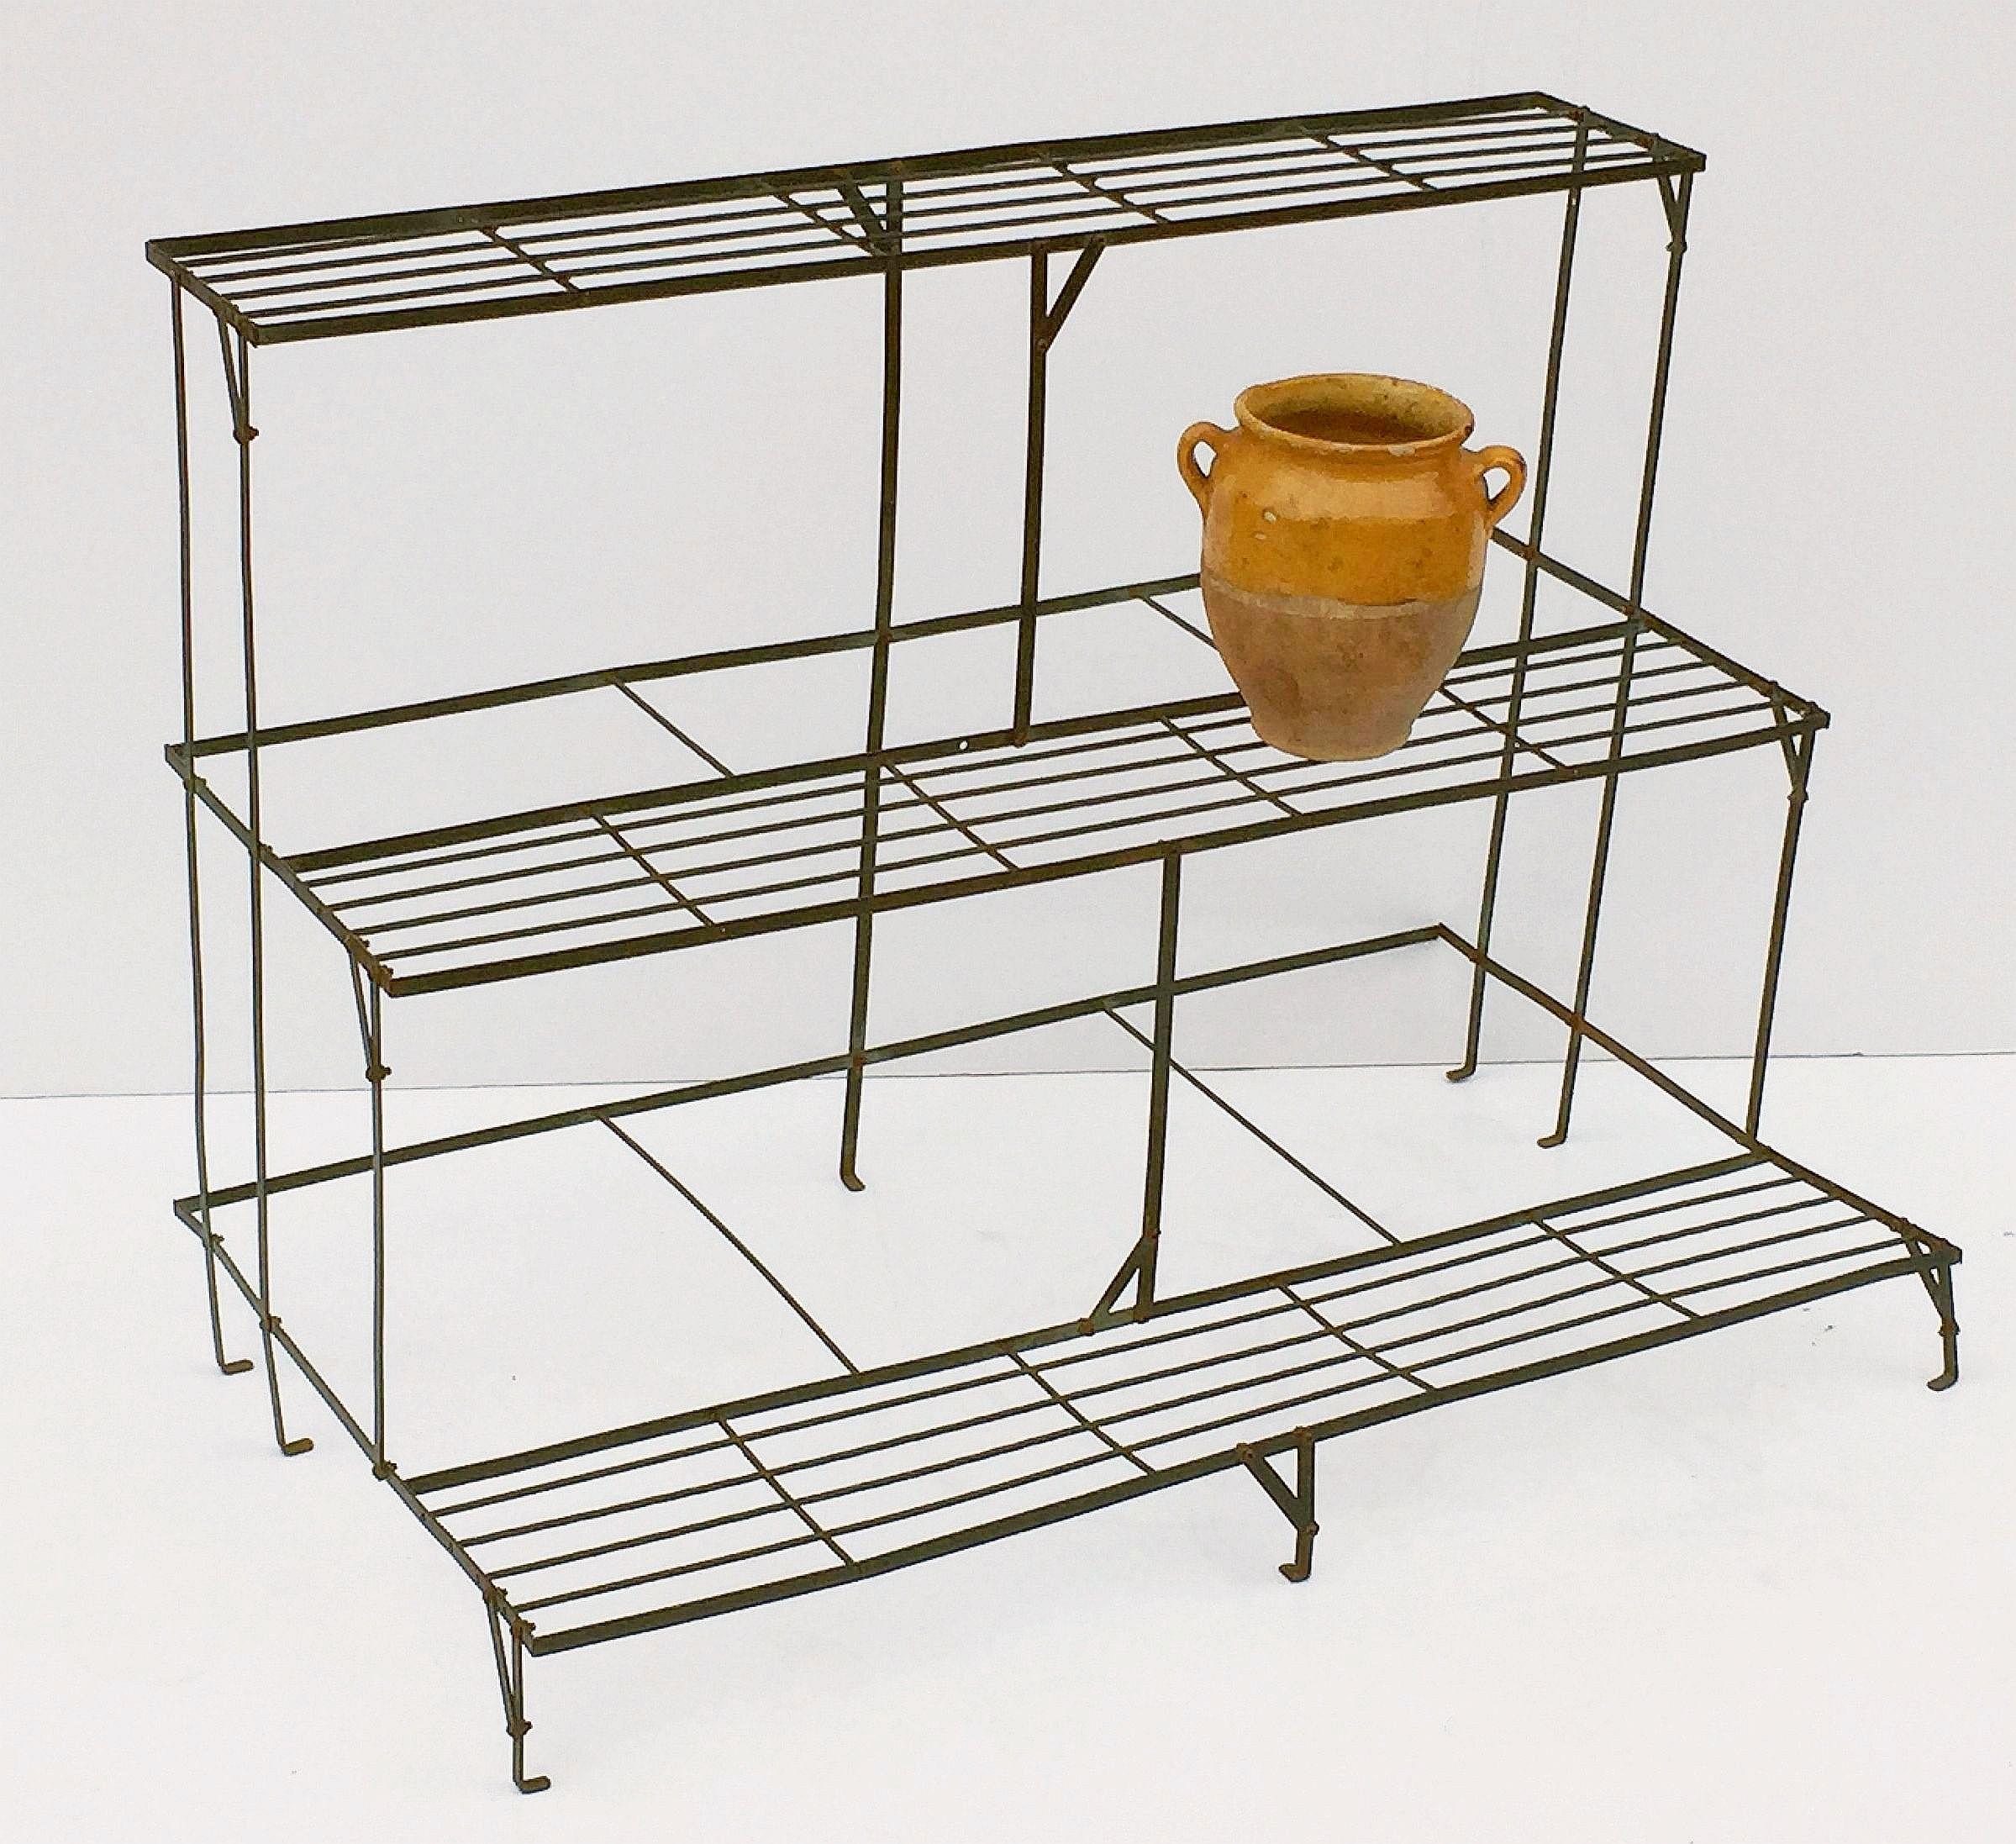 A fine English three-tiered rectangular plant stand of painted steel sturdy construction holds and displays a variety of planters and urns for the indoor or outdoor garden room, garden, or conservatory.

Measures: Height 29 1/2 inches
width 39 1/2